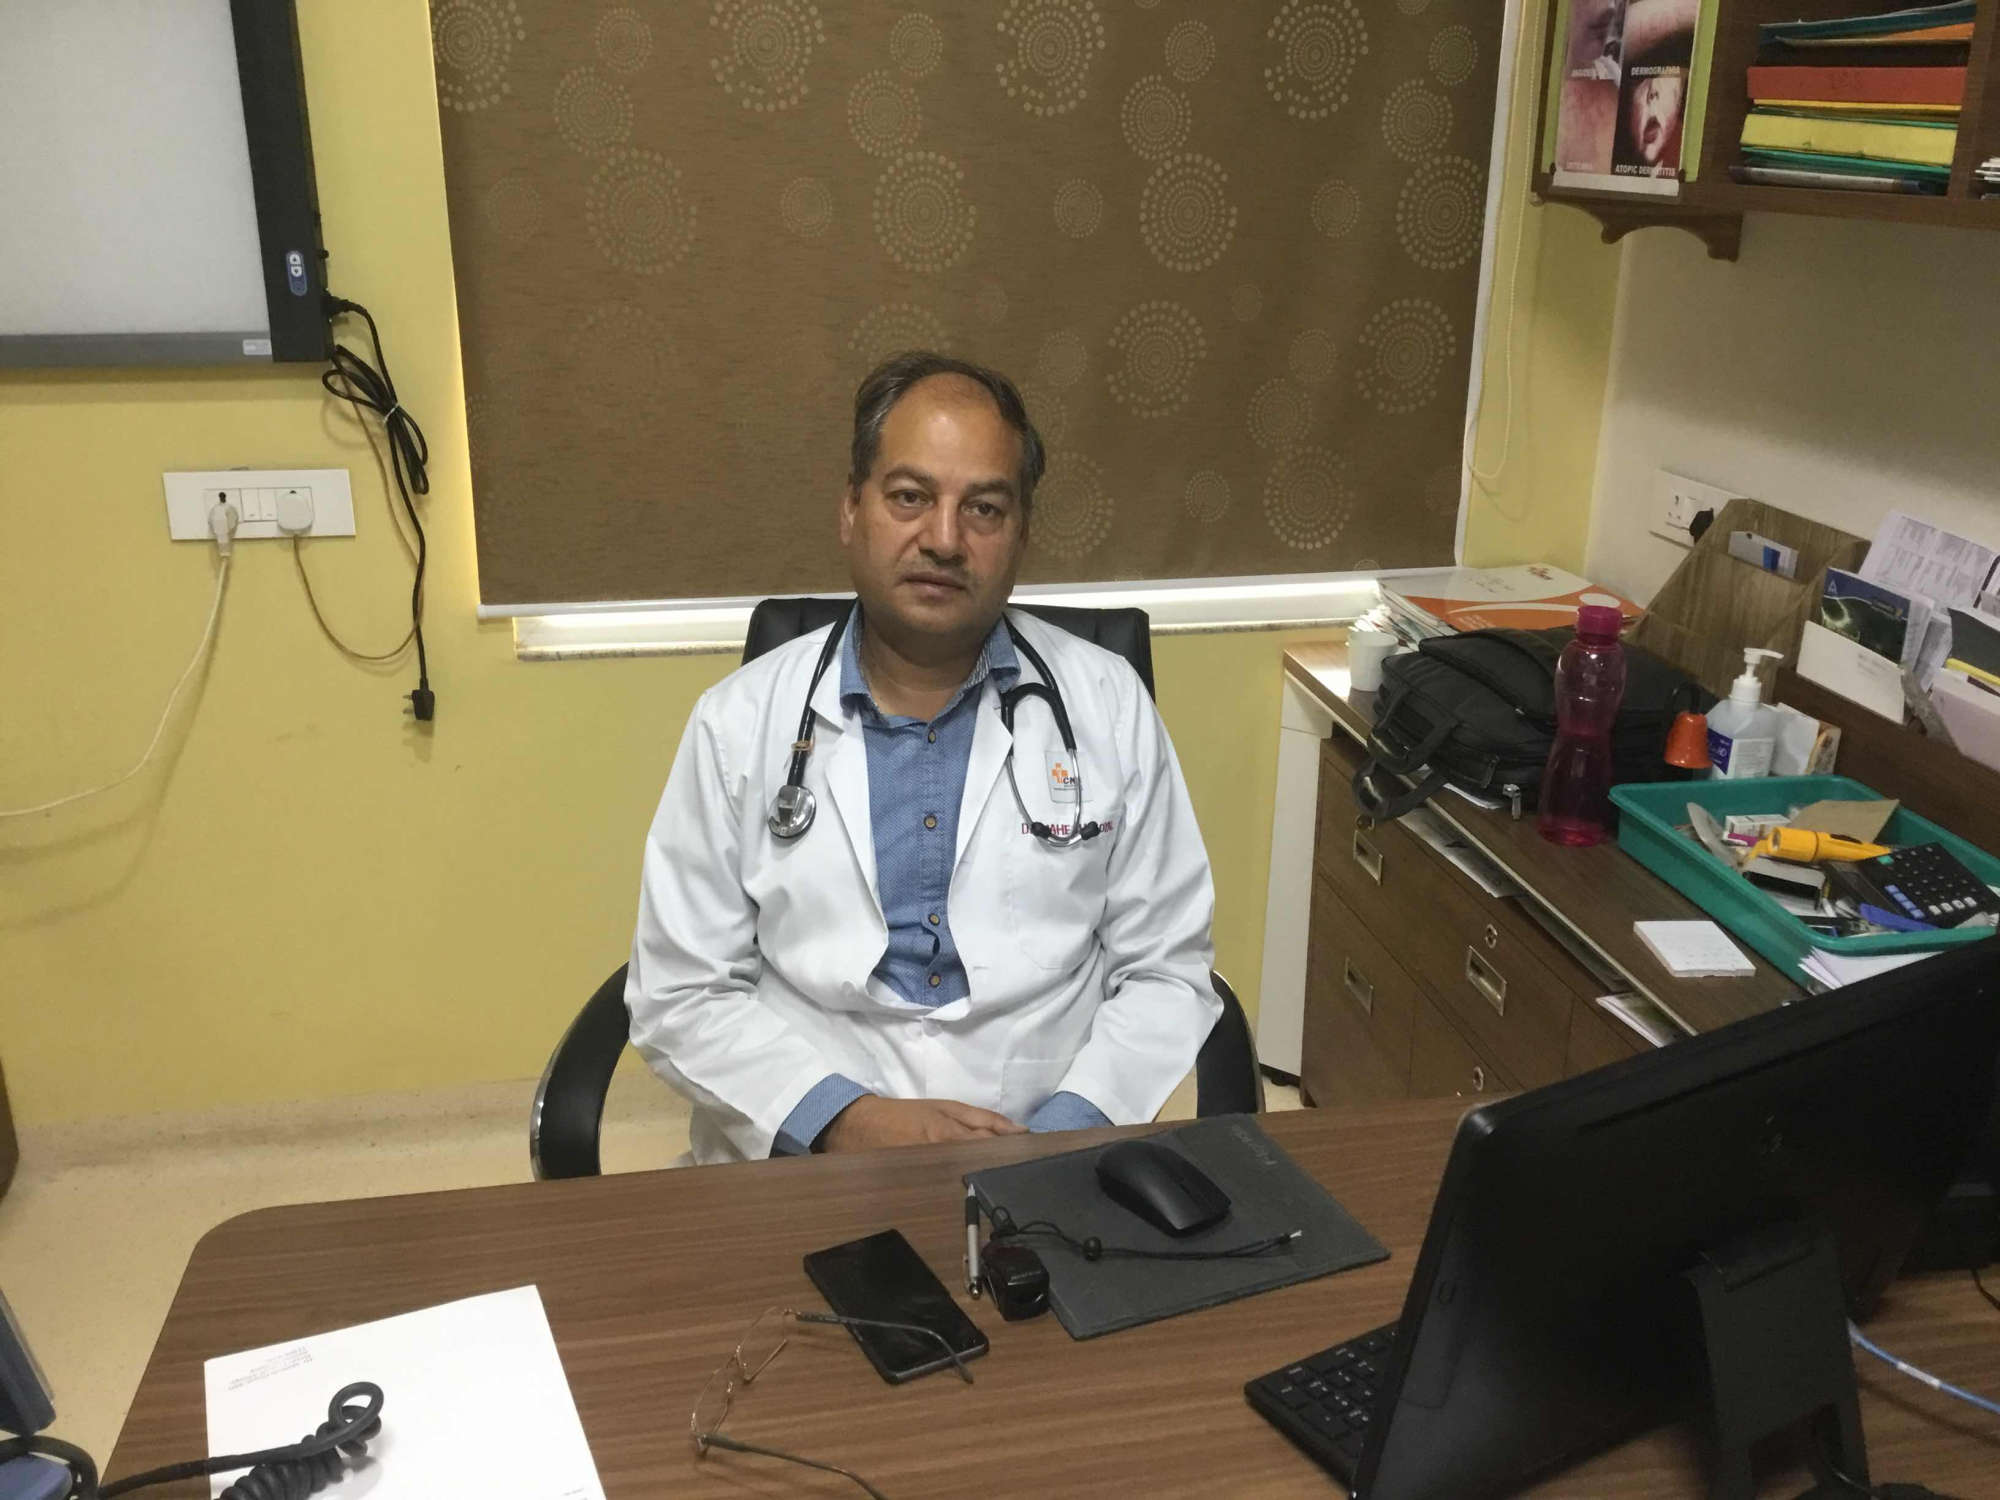 Dr. Mahesh Goyal  from Dher Ke Balaji Theen Dukan, Sikar Road ,Jaipur, Rajasthan, 302012, India 31 years experience in Speciality General Physician | Family Medicine | General Medicine | Allergy | Pharmacy | Asthma Specialist | Kayawell